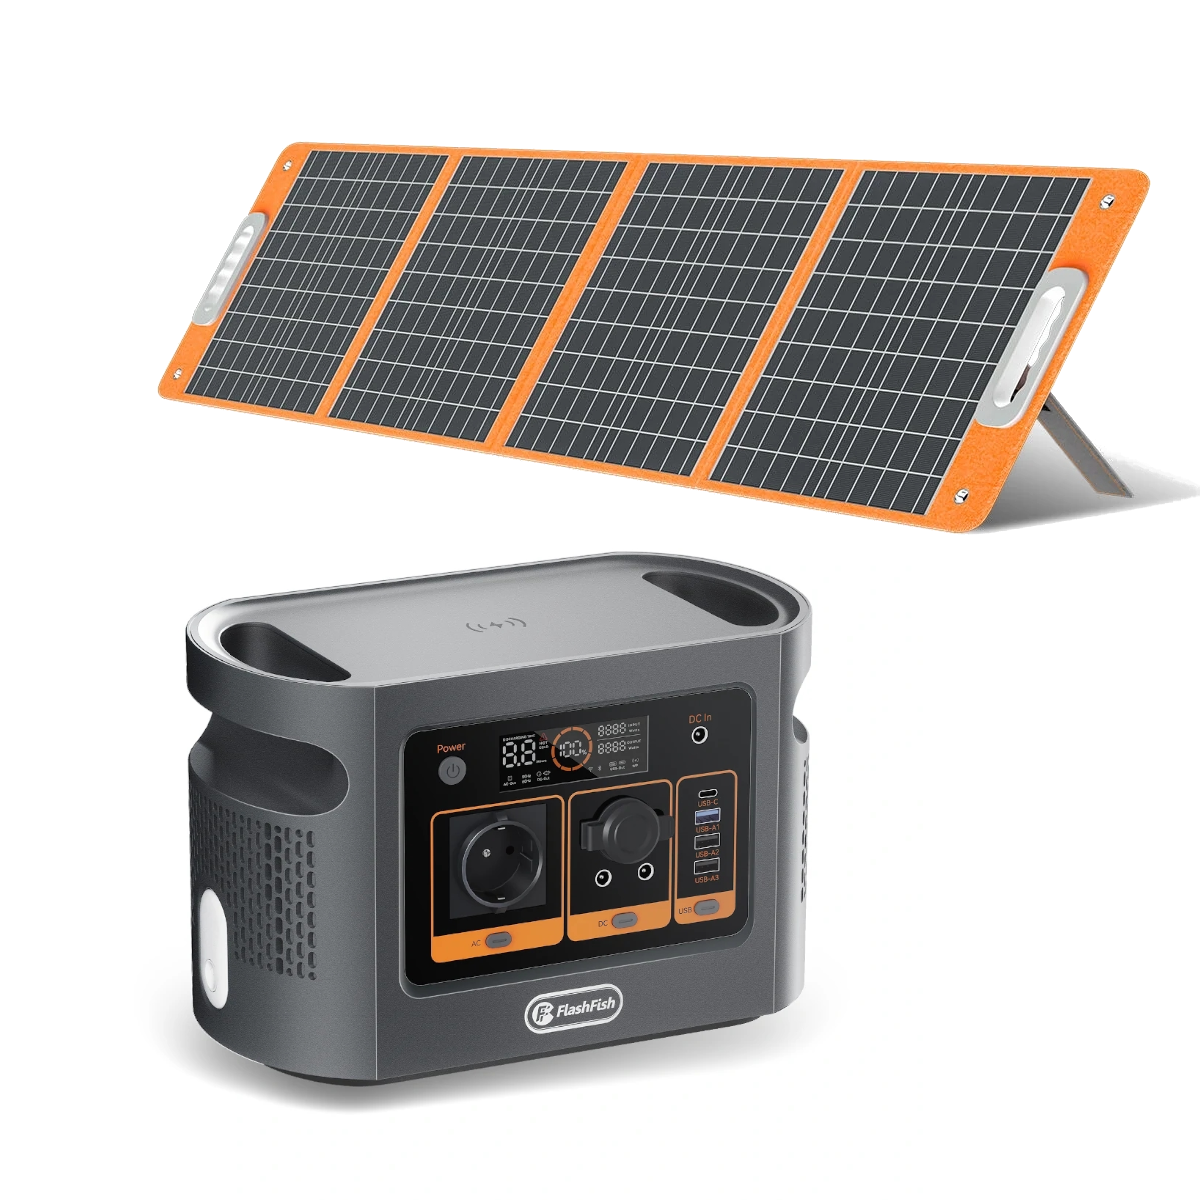 [EU Direct] FlashFish QE01D UPS 600W 448Wh Portable Power Station LiFePO4 Lithium Battery Pack with 1Pc TSP 18V 100W Foldable Solar Panel, Support in Solar Panels Backup Power Home Energy Storage Outdoor Camping Power Generator